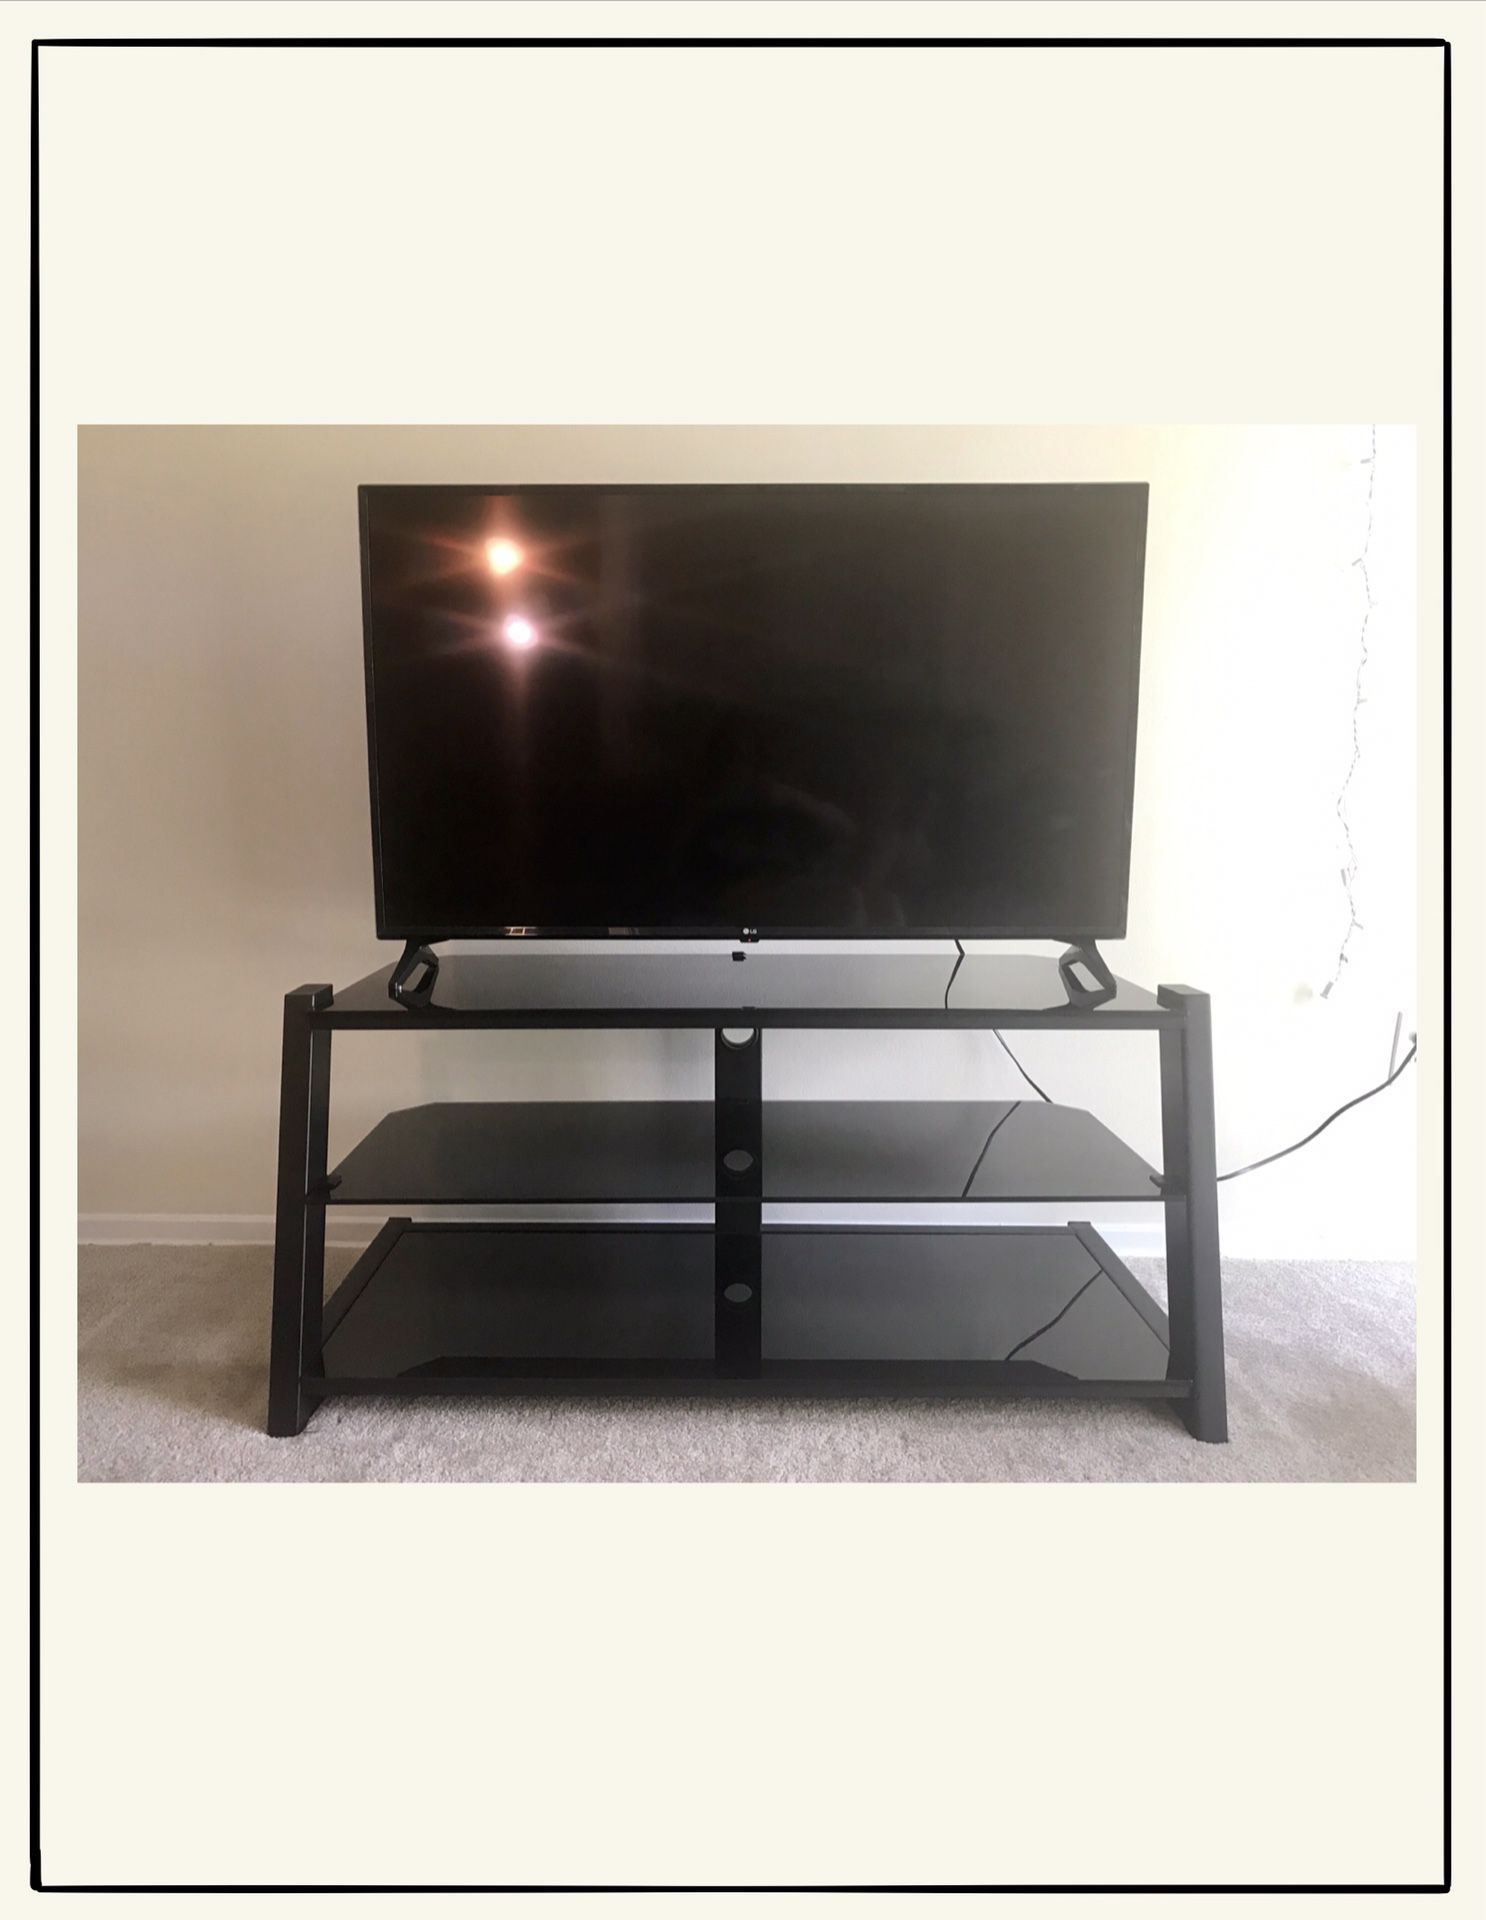 Black glass/metal TV stand (50 inches)